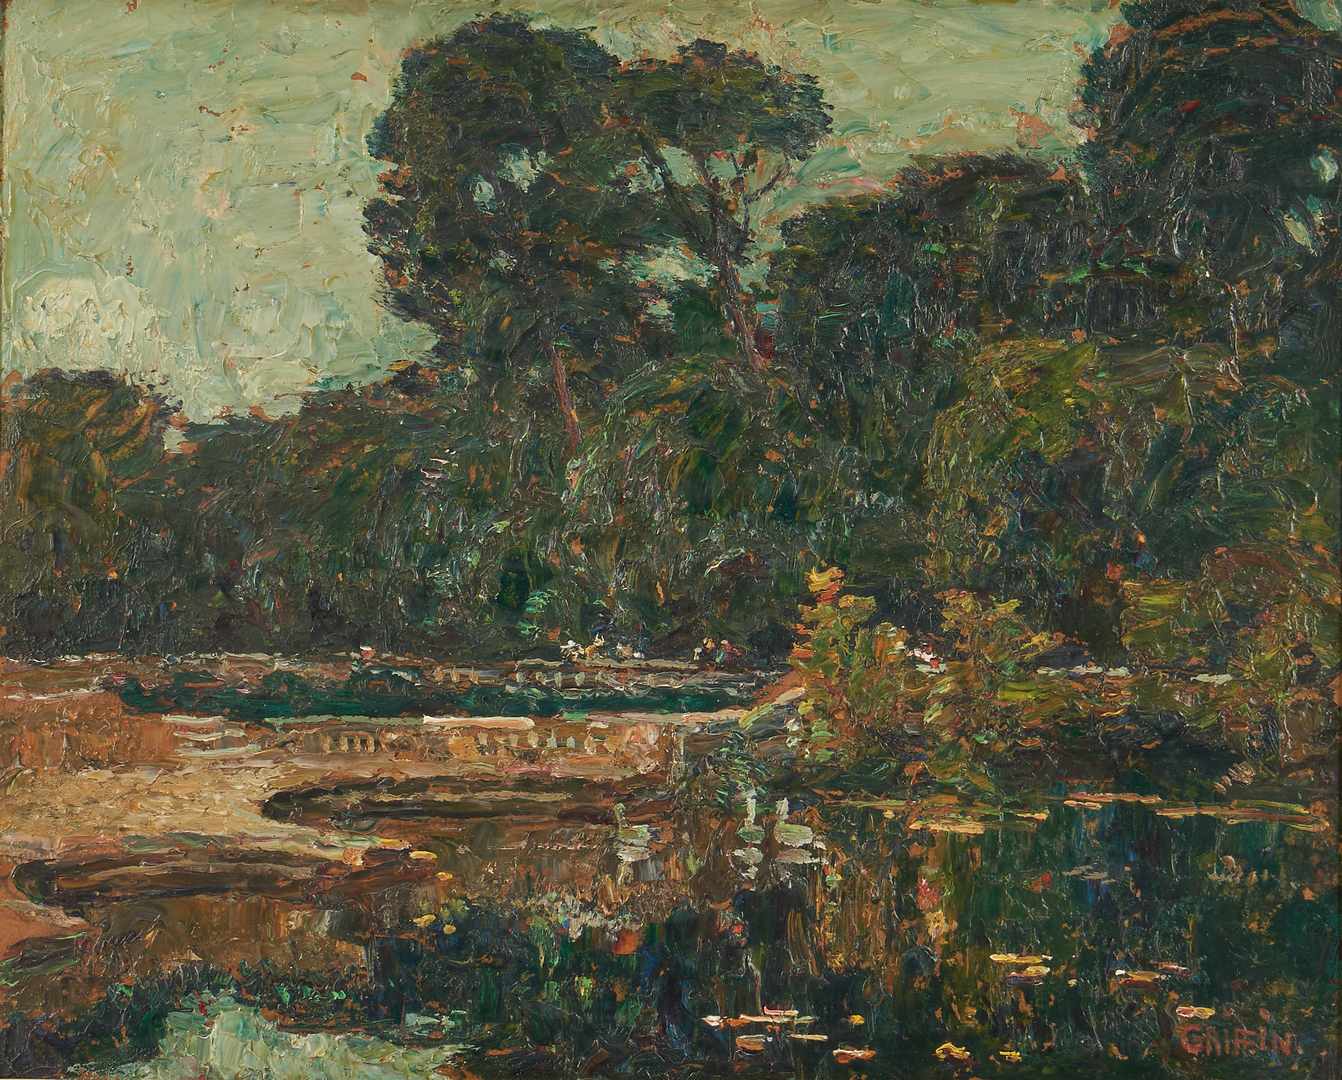 Lot 371: Walter Griffin O/B Landscape Painting, Public Gardens at Nimes